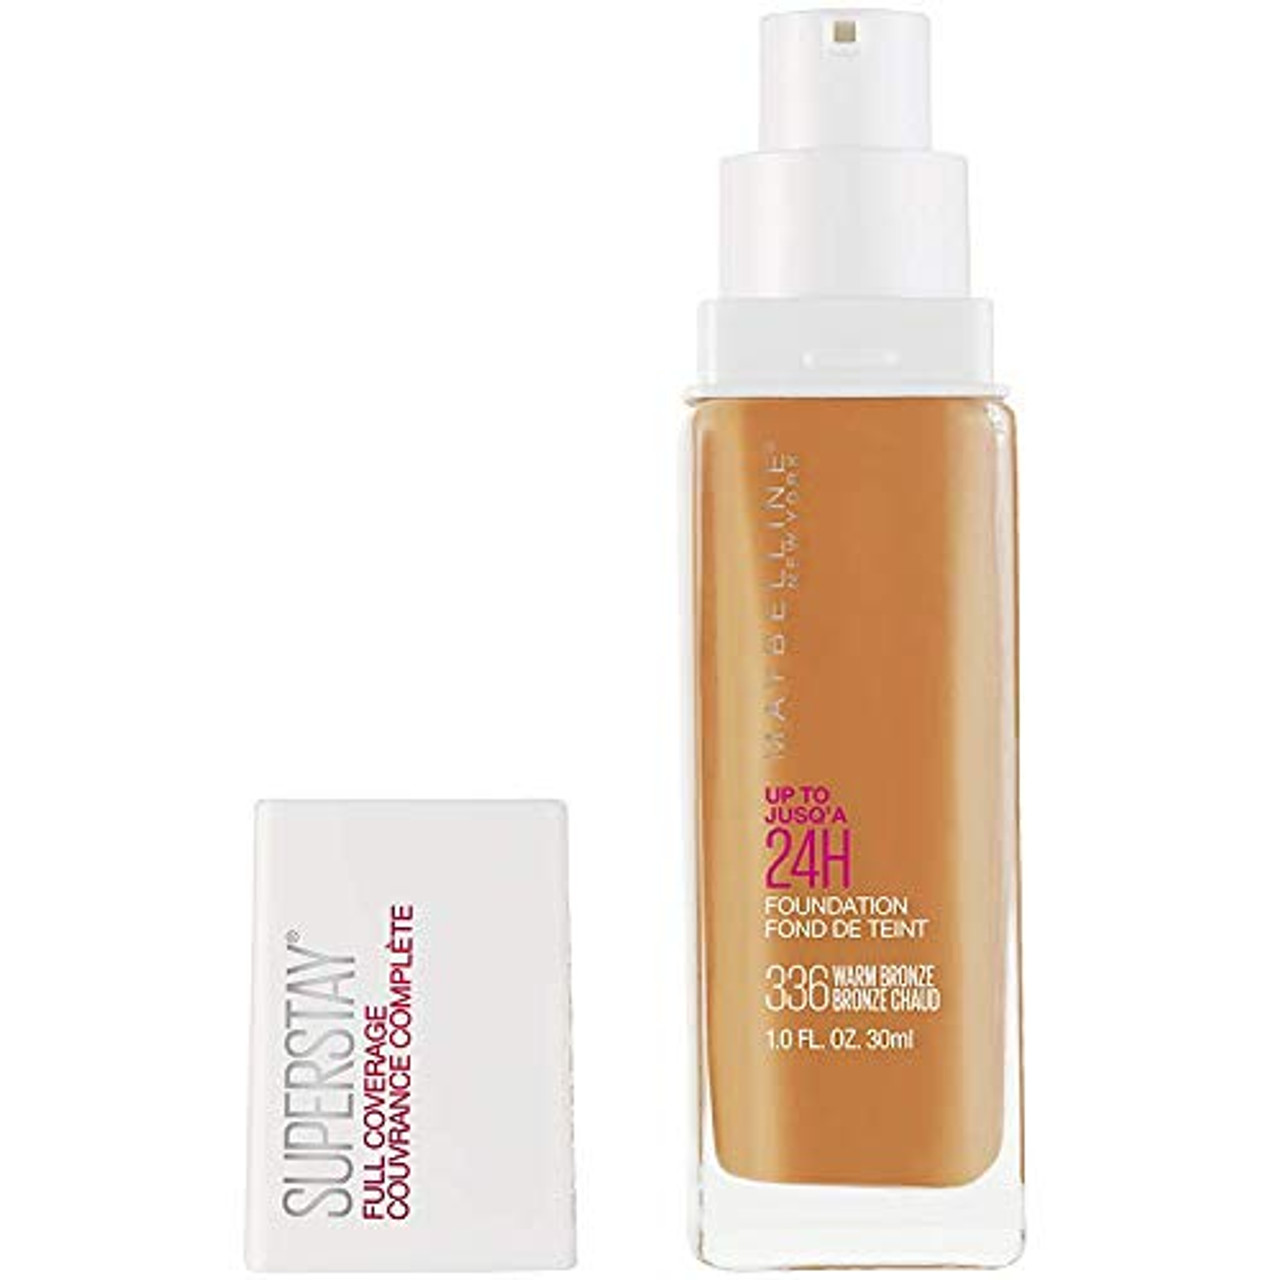  Maybelline New York Super Stay 24Hr Makeup, Nude, 1 Fluid  Ounce, Pack of 2 : Foundation Makeup : Beauty & Personal Care